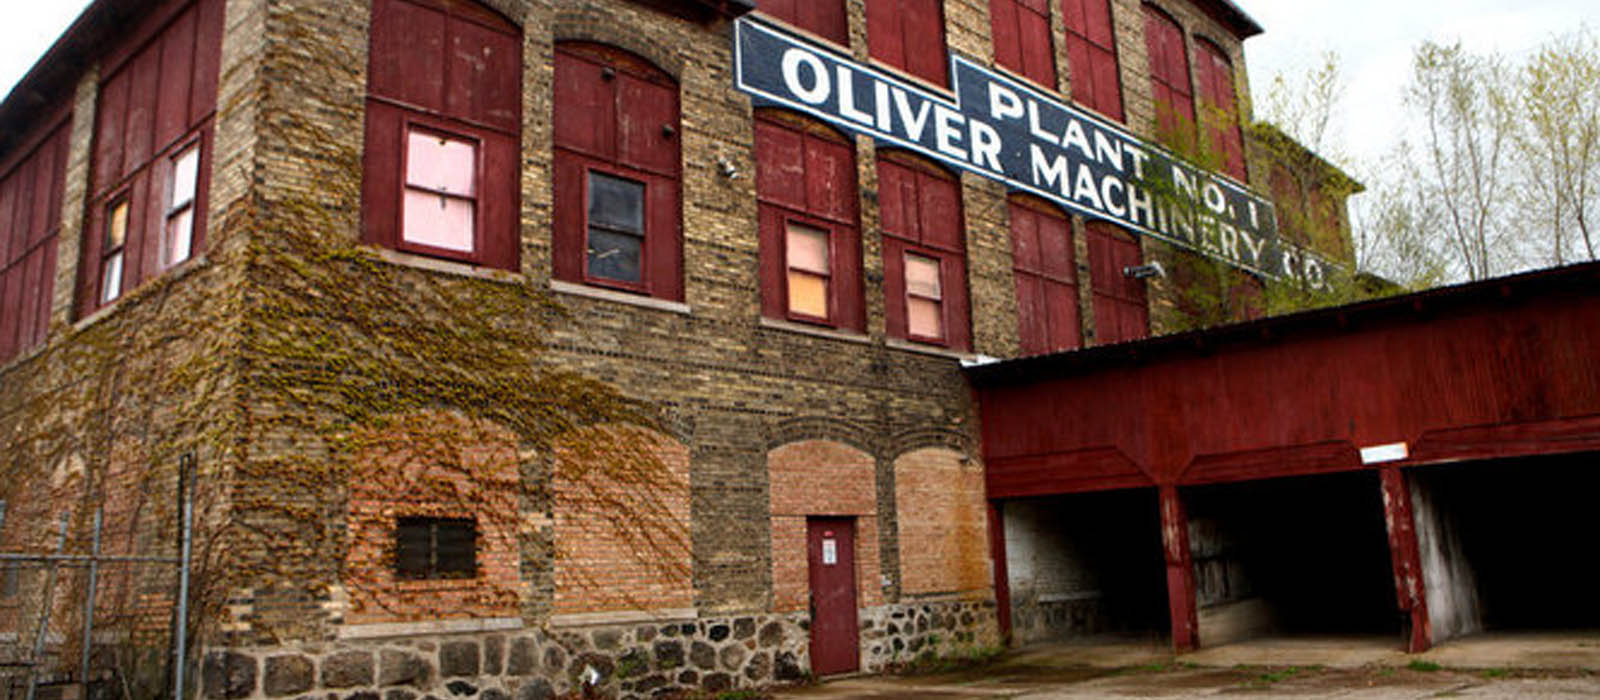 About the Oliver Machinery Company